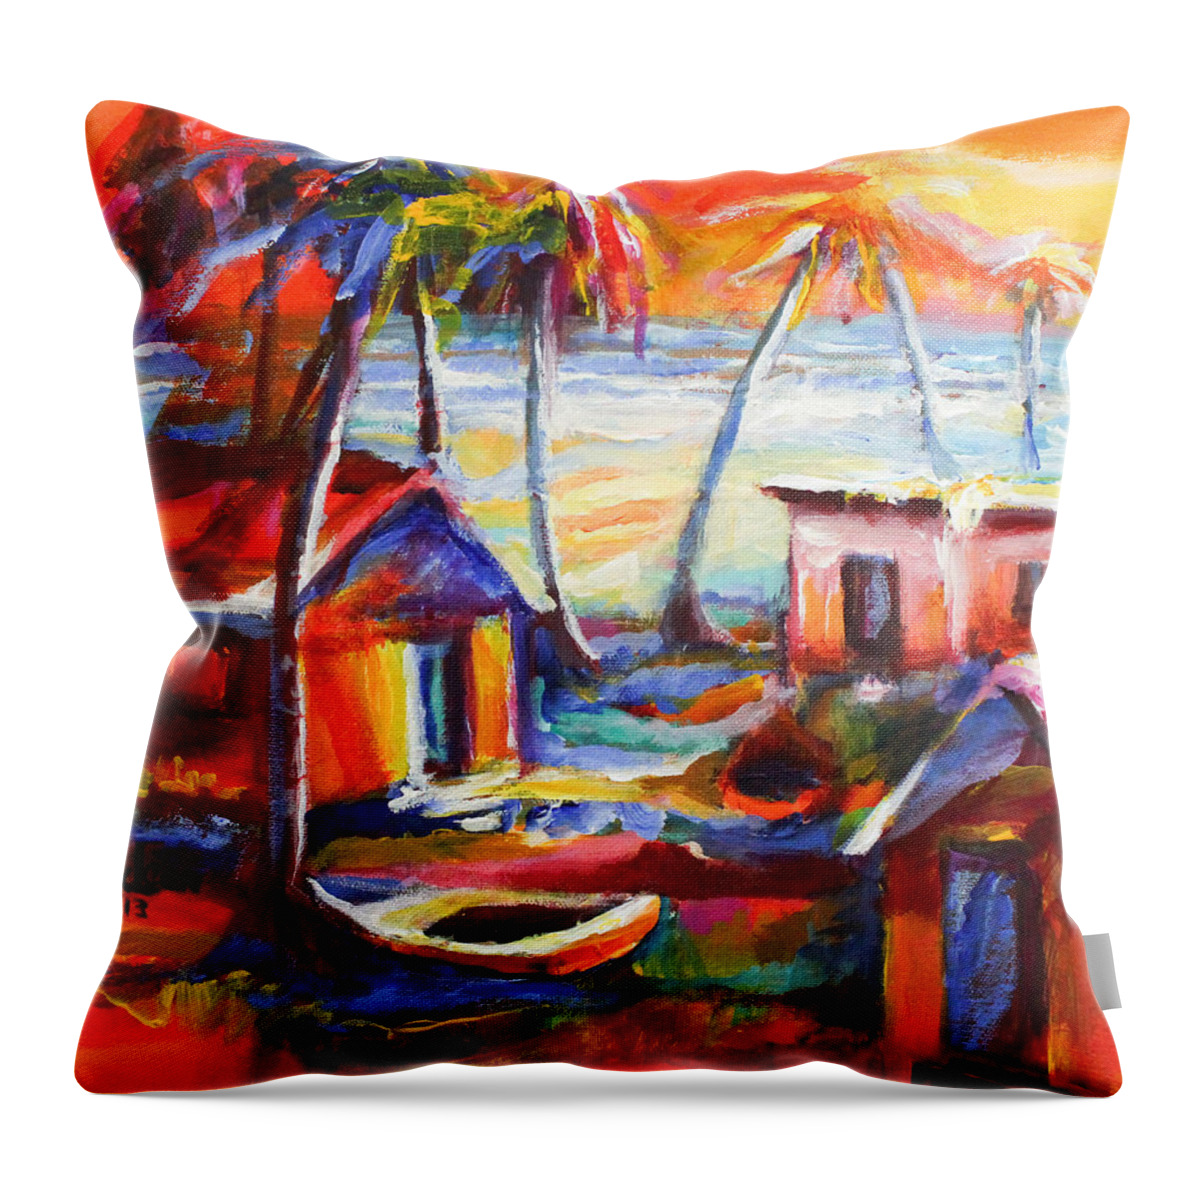 Abstract Throw Pillow featuring the painting Beach House II by Cynthia McLean